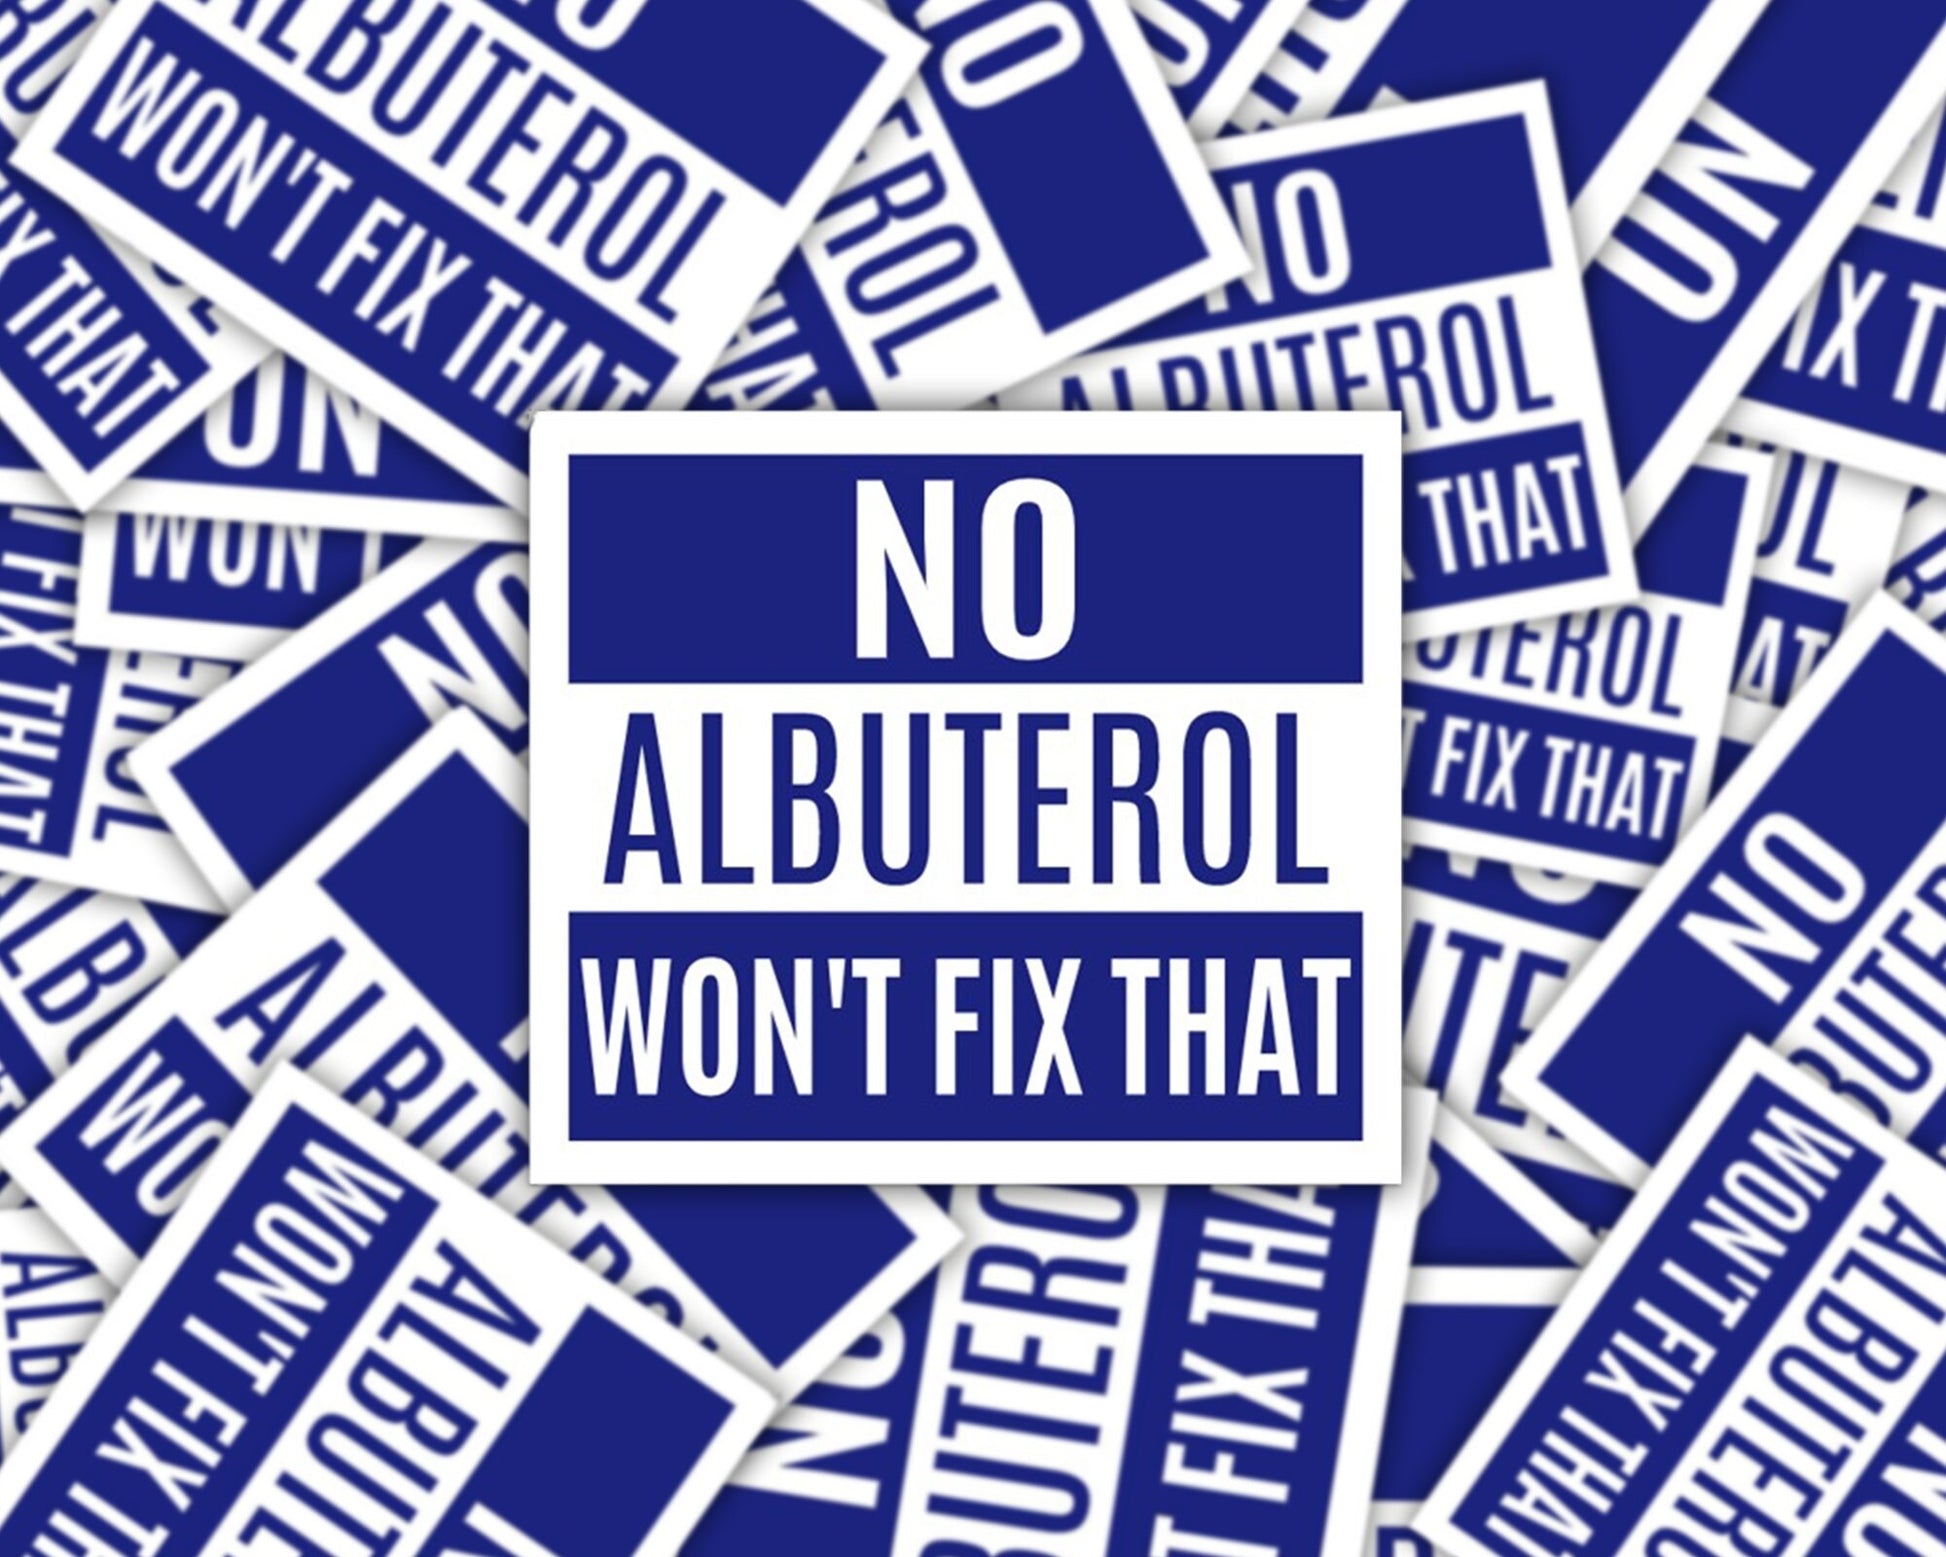 no albuterol won't fix that, respiratory sticker for laptop, respiratory sticker, medication sticker, pharmacist gift, funny stickers for